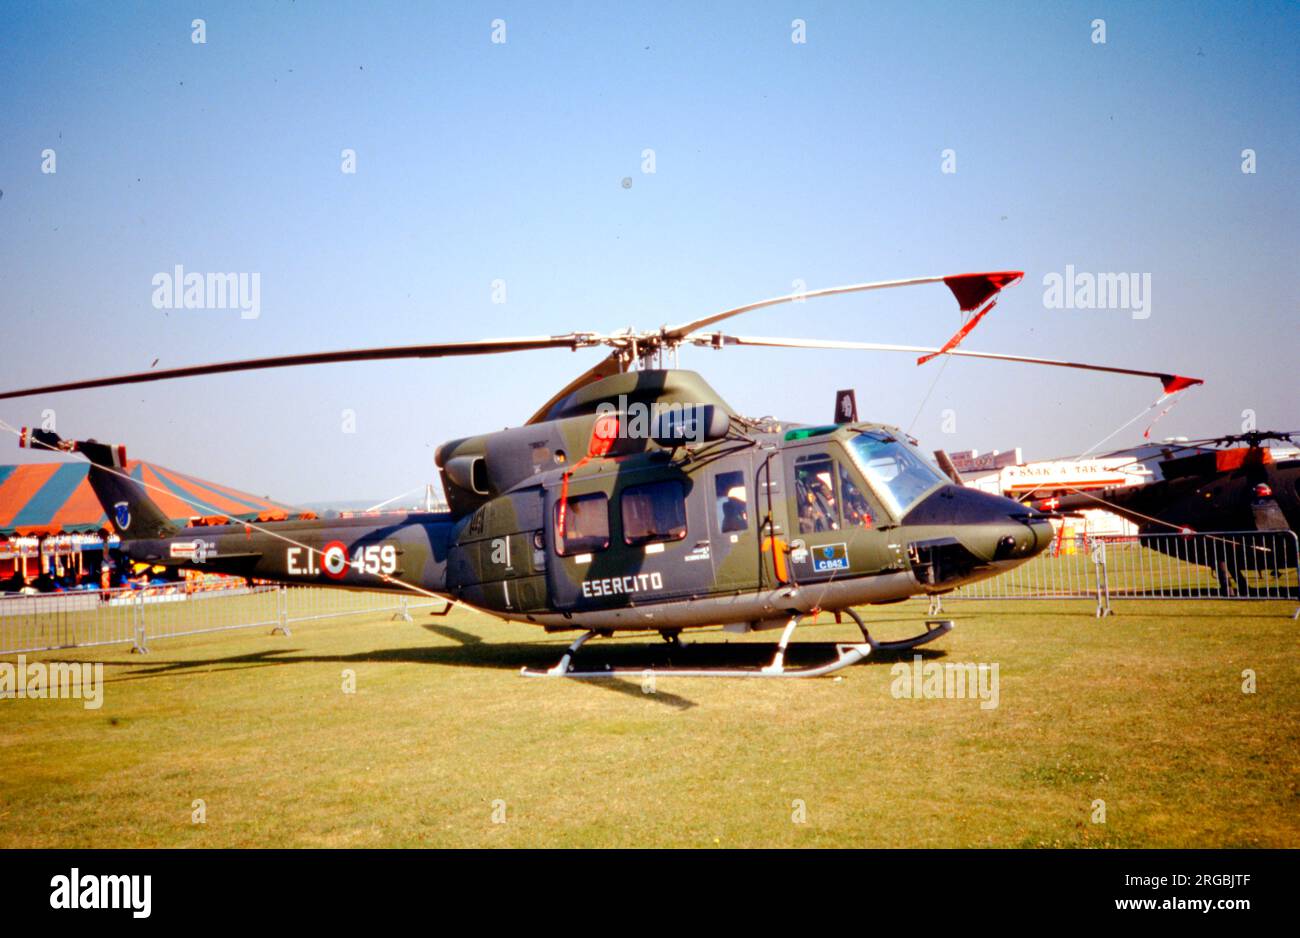 Aviazione dell'Esercito AVES - Agusta-Bell ab.412 MM81259 / Ei-459 (msn 25567),of 53 Gruppo, Middle Wallop am 20. Juli 1990. (Aviazione dell'Esercito AVES – italian Army Aviation). Stockfoto